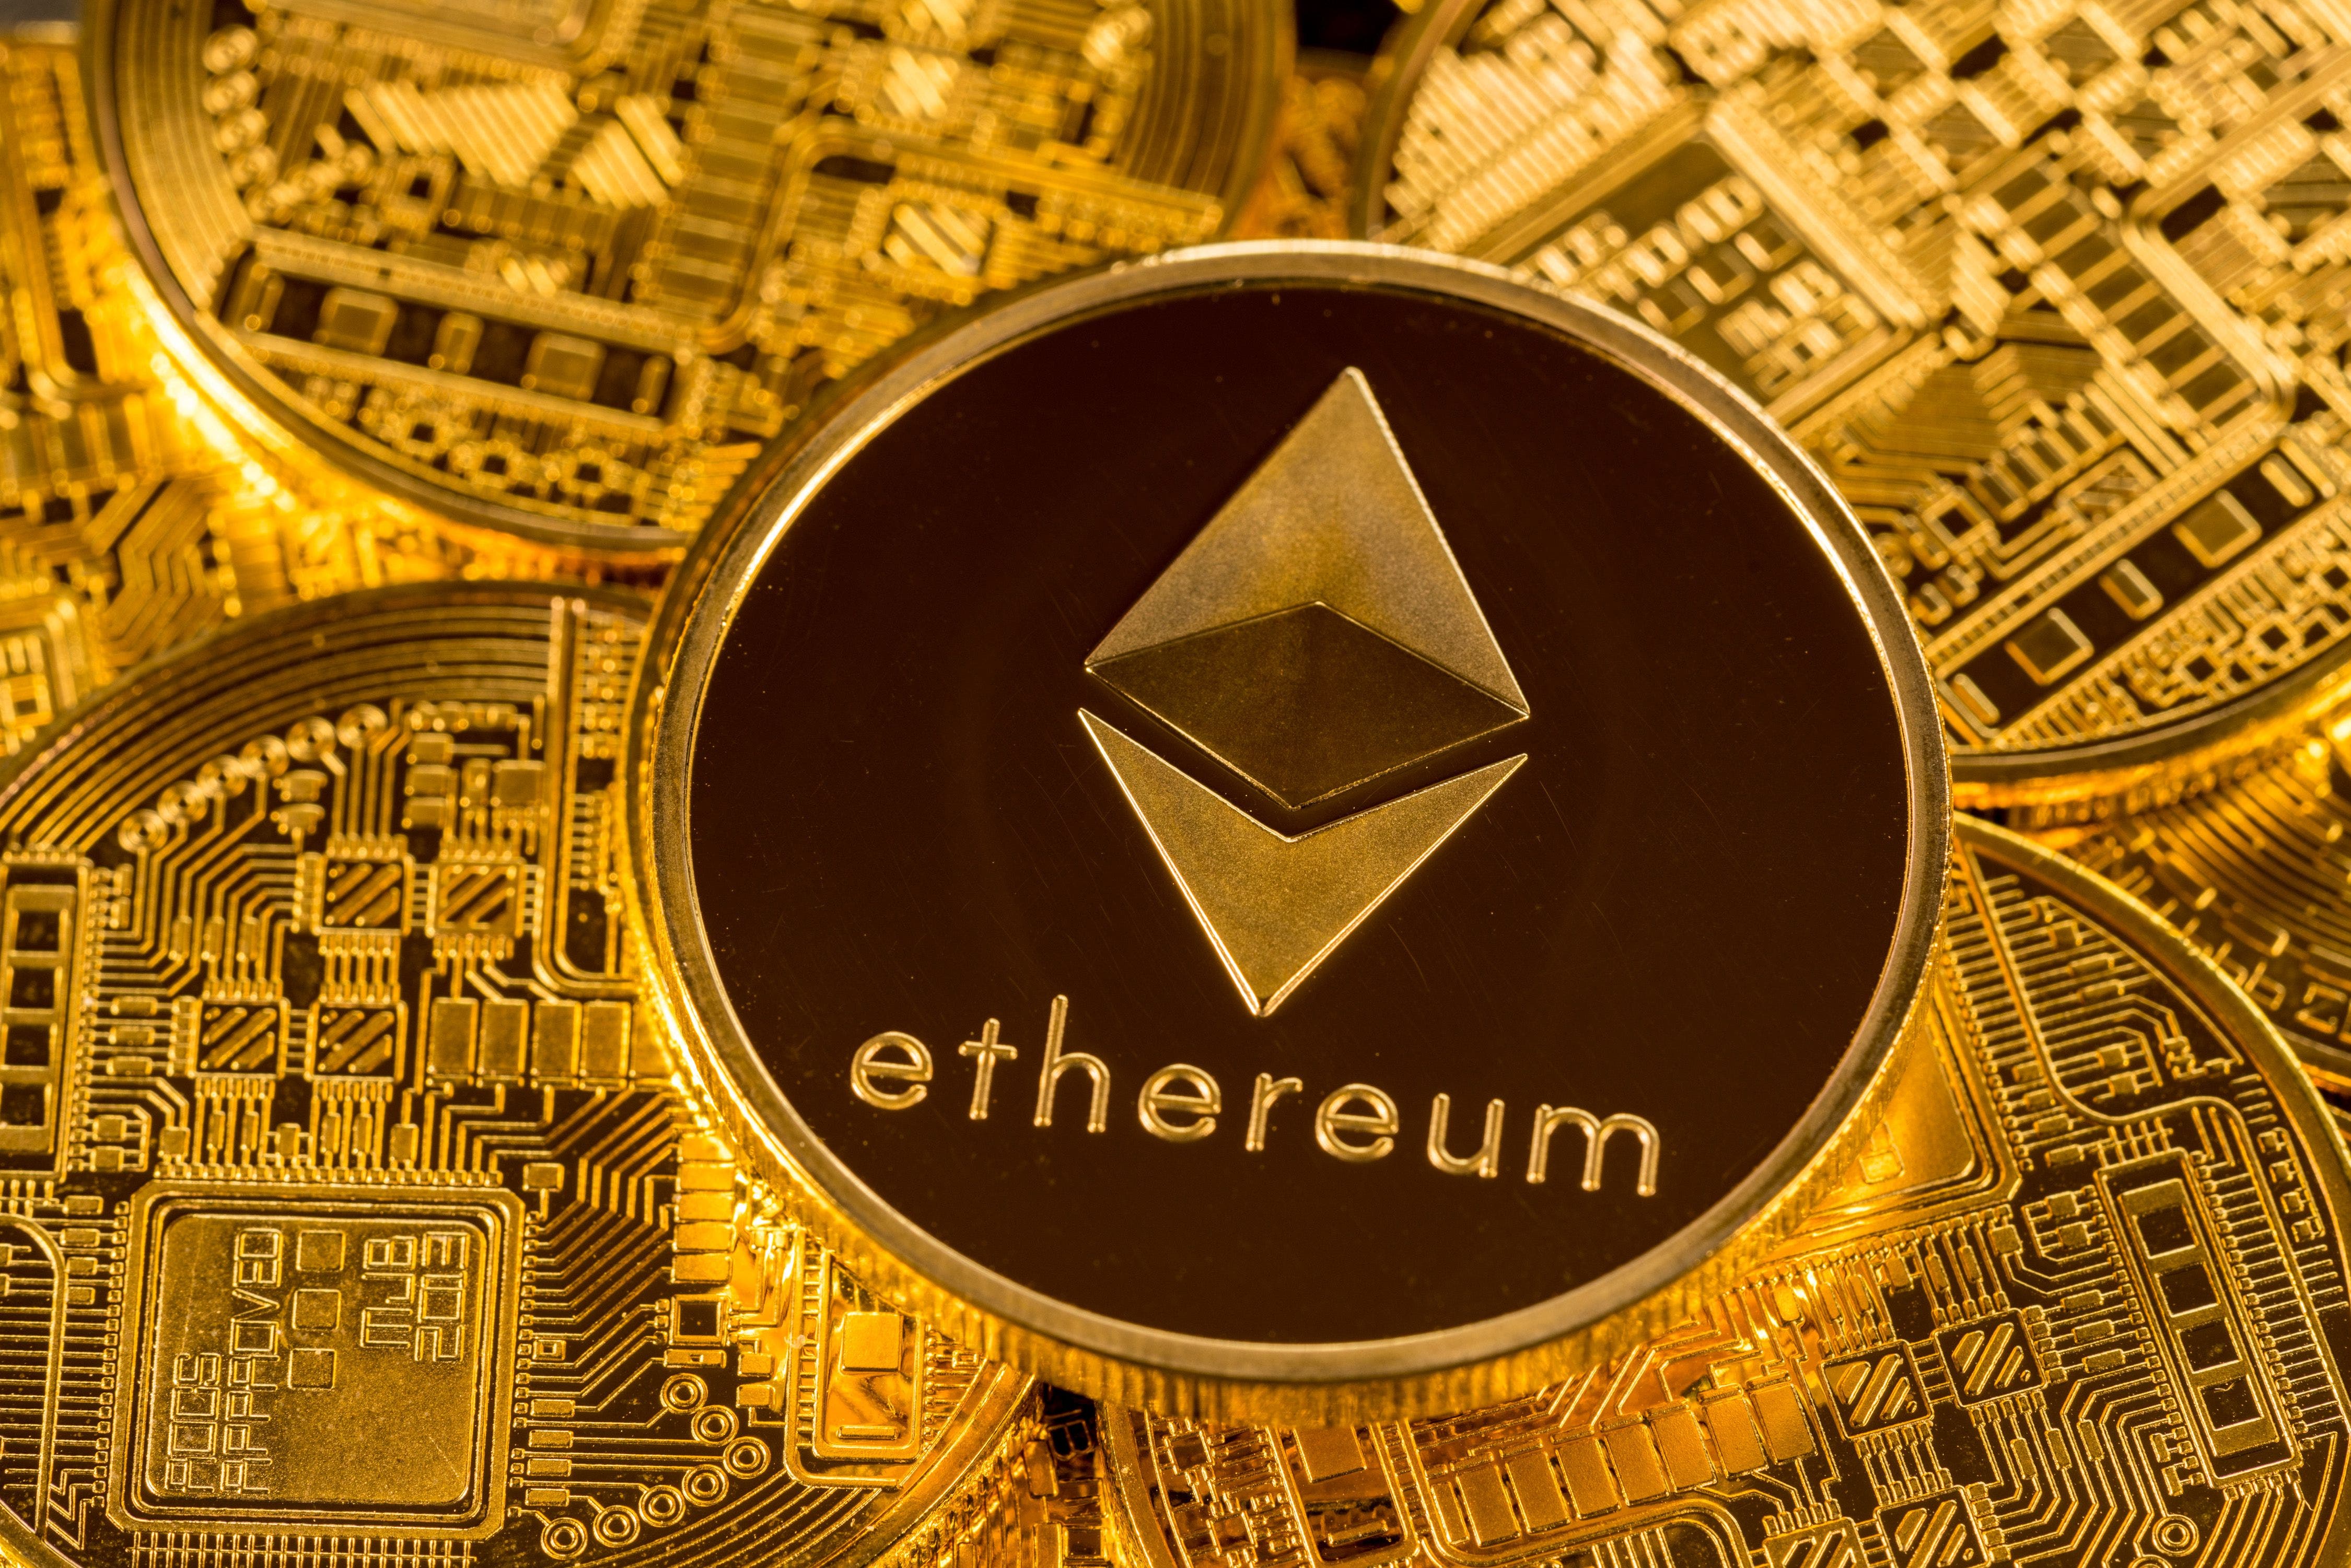 Ethereum Drops Below $1,600 Mark, Here Are Other Crypto Movers That Should Be On Your Radar Today